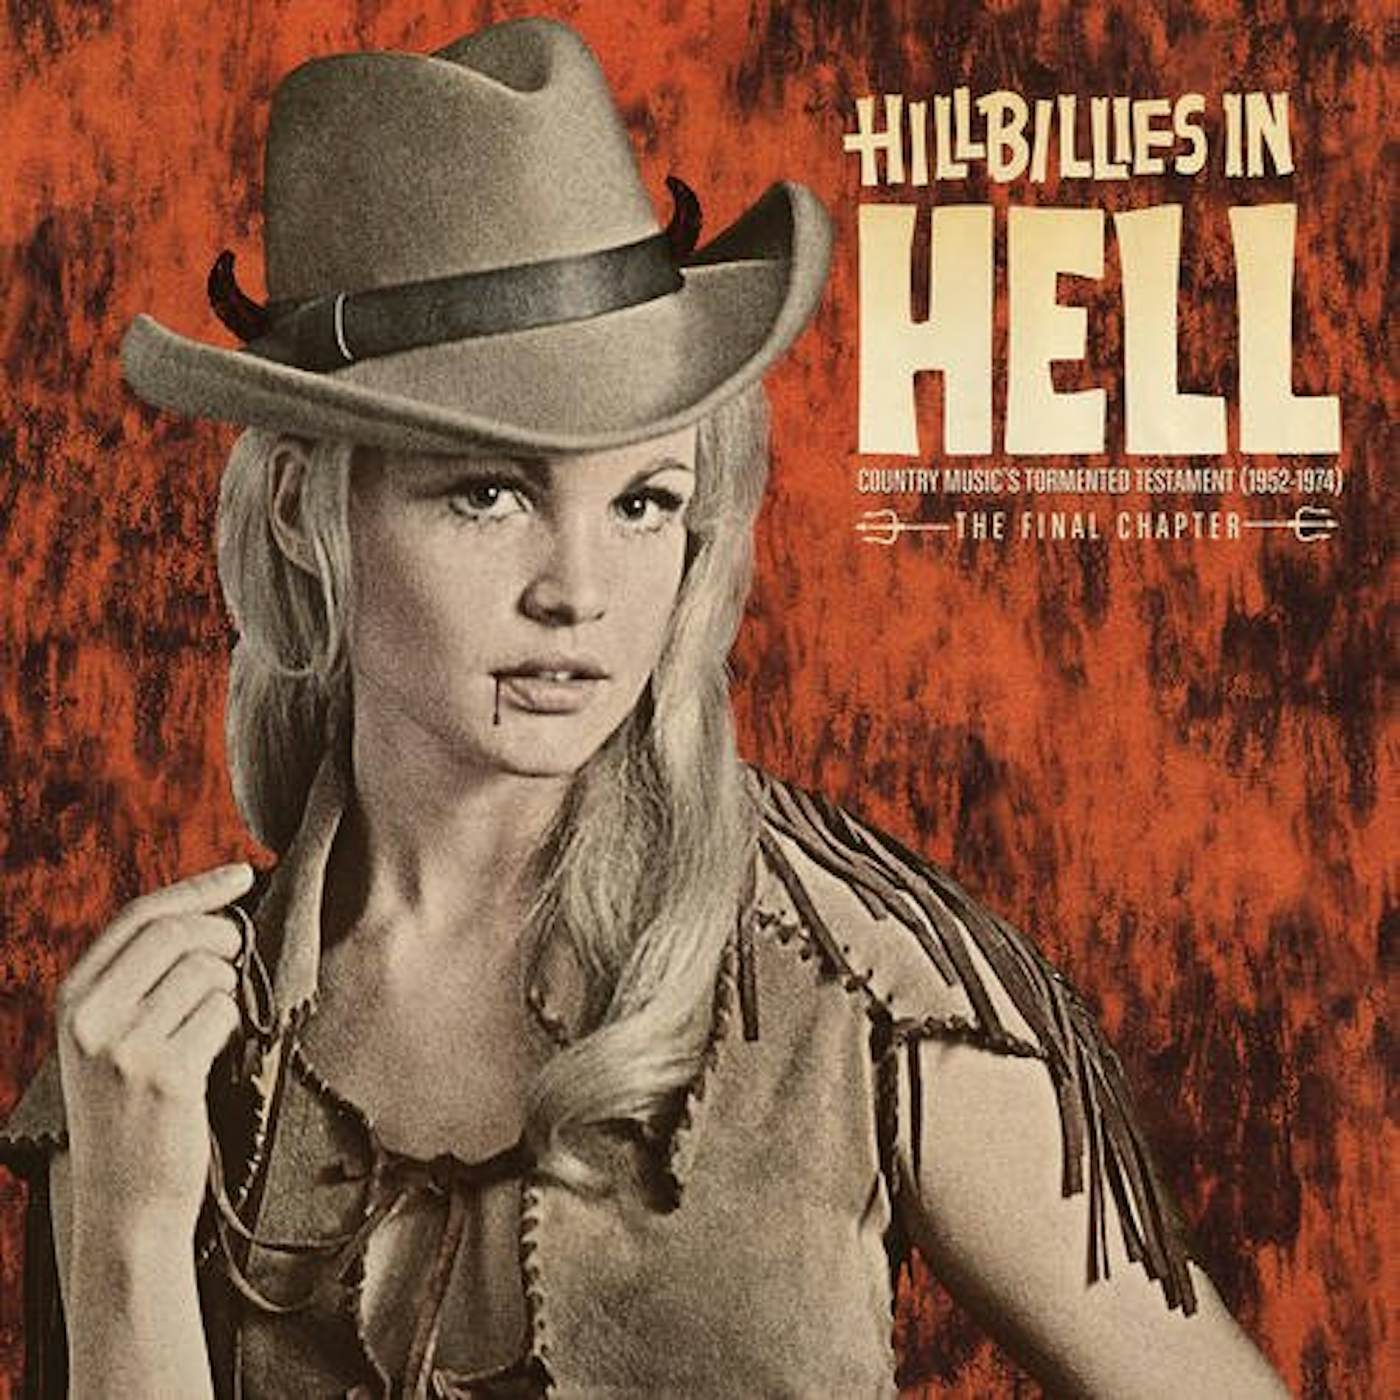 HILLBILLIES IN HELL: COUNTRY MUSIC'S TORMENTED CD